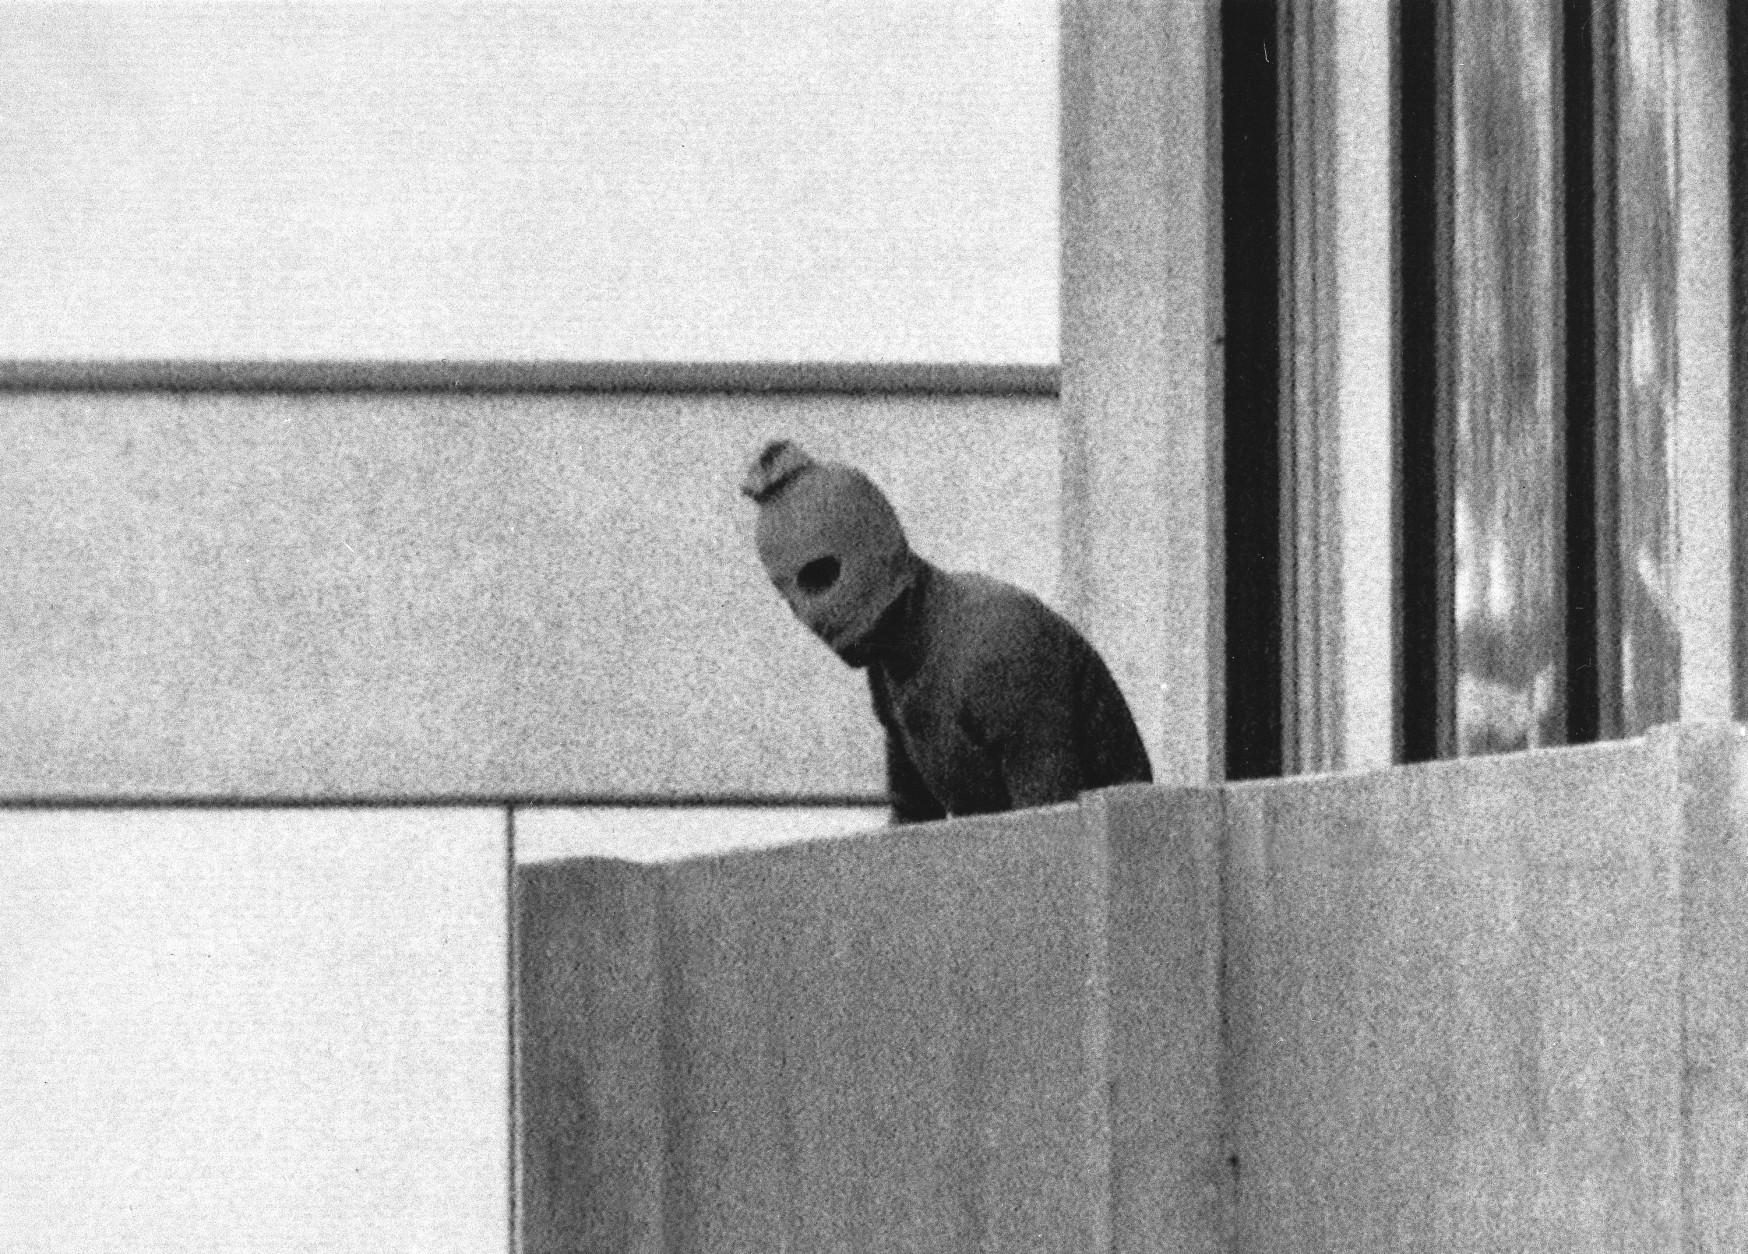 FILE - In this Sept. 5, 1972, file photo, a member of the Arab Commando group which seized members of the Israeli Olympic Team at their quarters at the Munich Olympic Village appears with a hood over his face on the balcony of the village building where the commandos held several members of the Israeli team hostage.  (AP Photo/Kurt Strumpf, File)